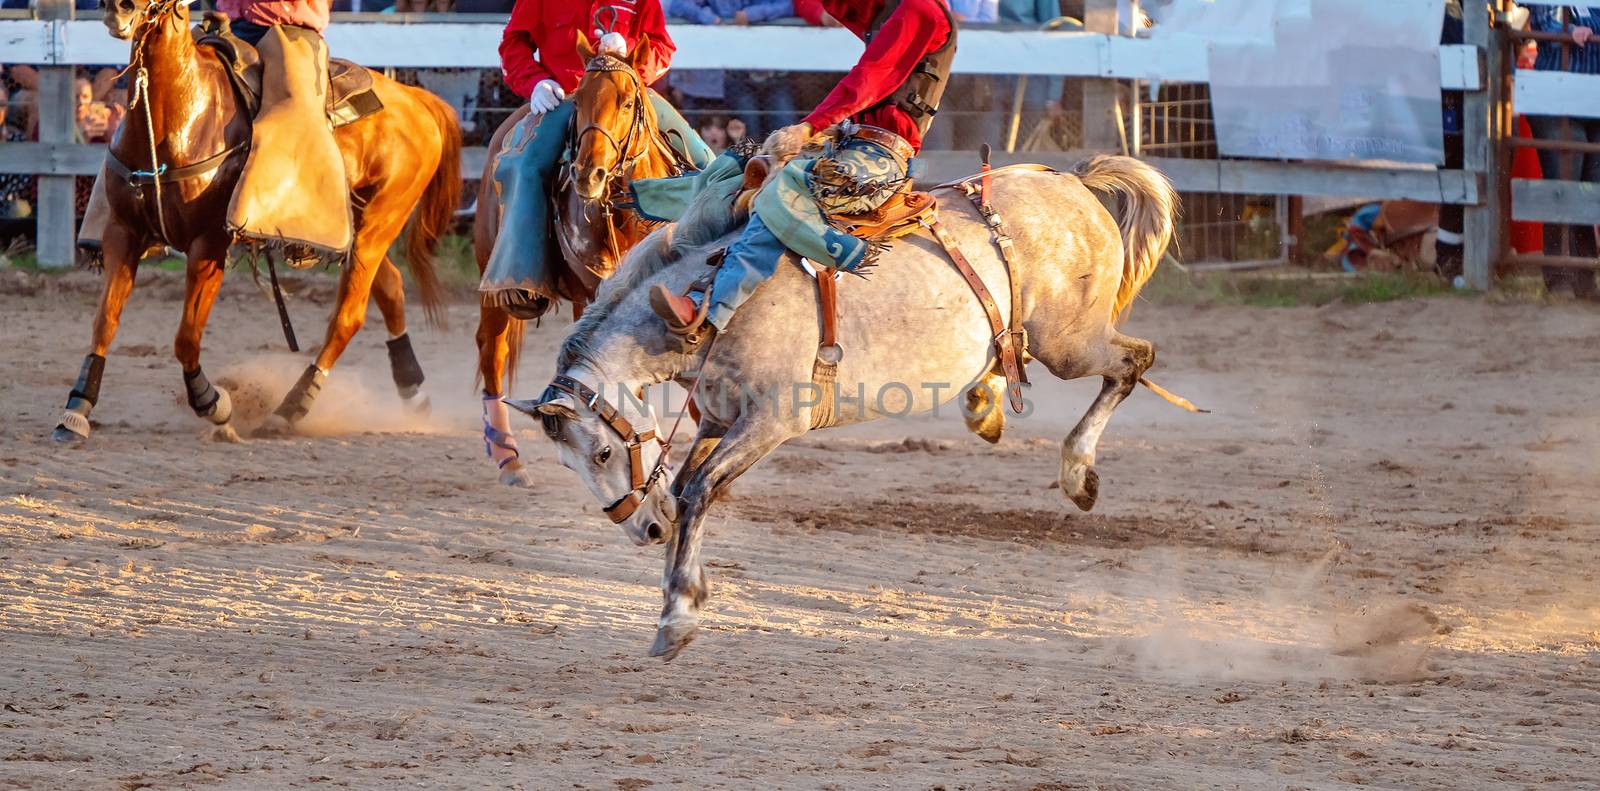 Cowboy rides a bucking bronc horse in a sanctioned competition event at an Australian country rodeo